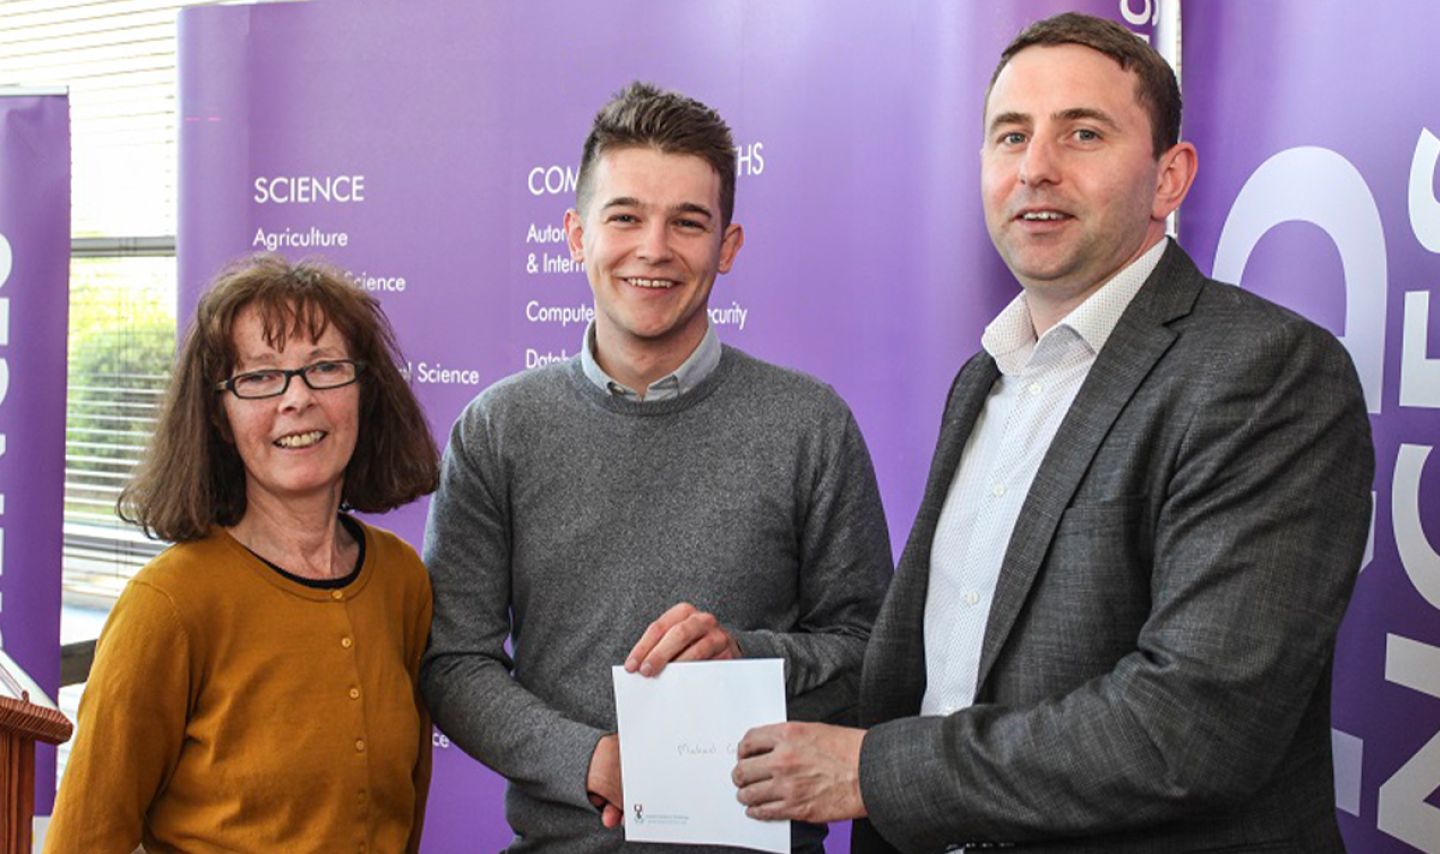 SETU's Michael Cooke wins Student of the Year and Best Physics Research Project